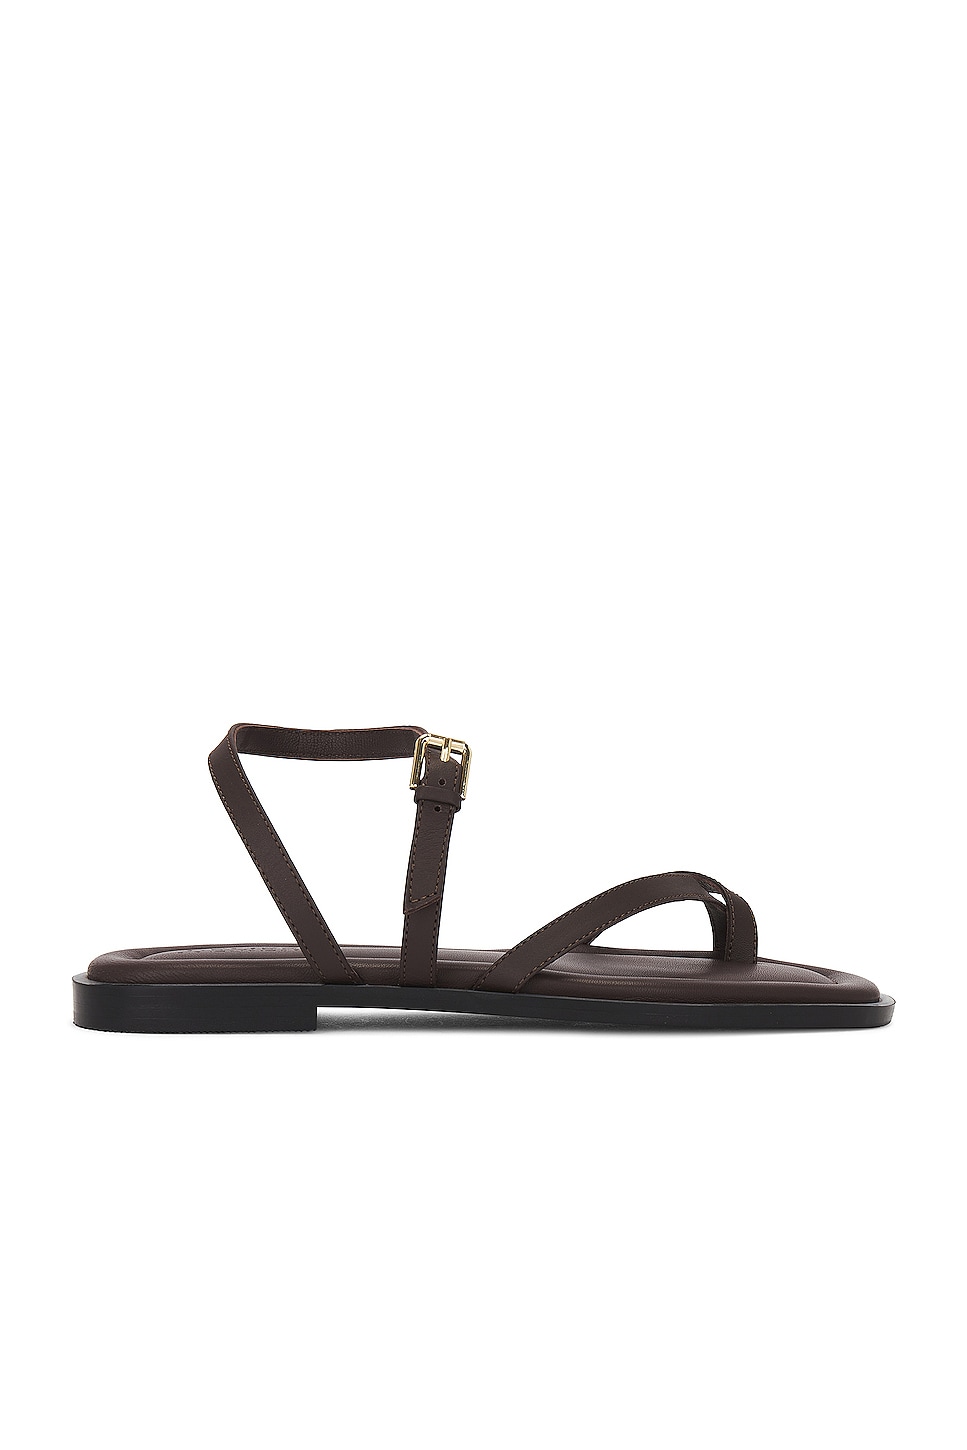 Image 1 of A.EMERY Lucia Sandal in Walnut